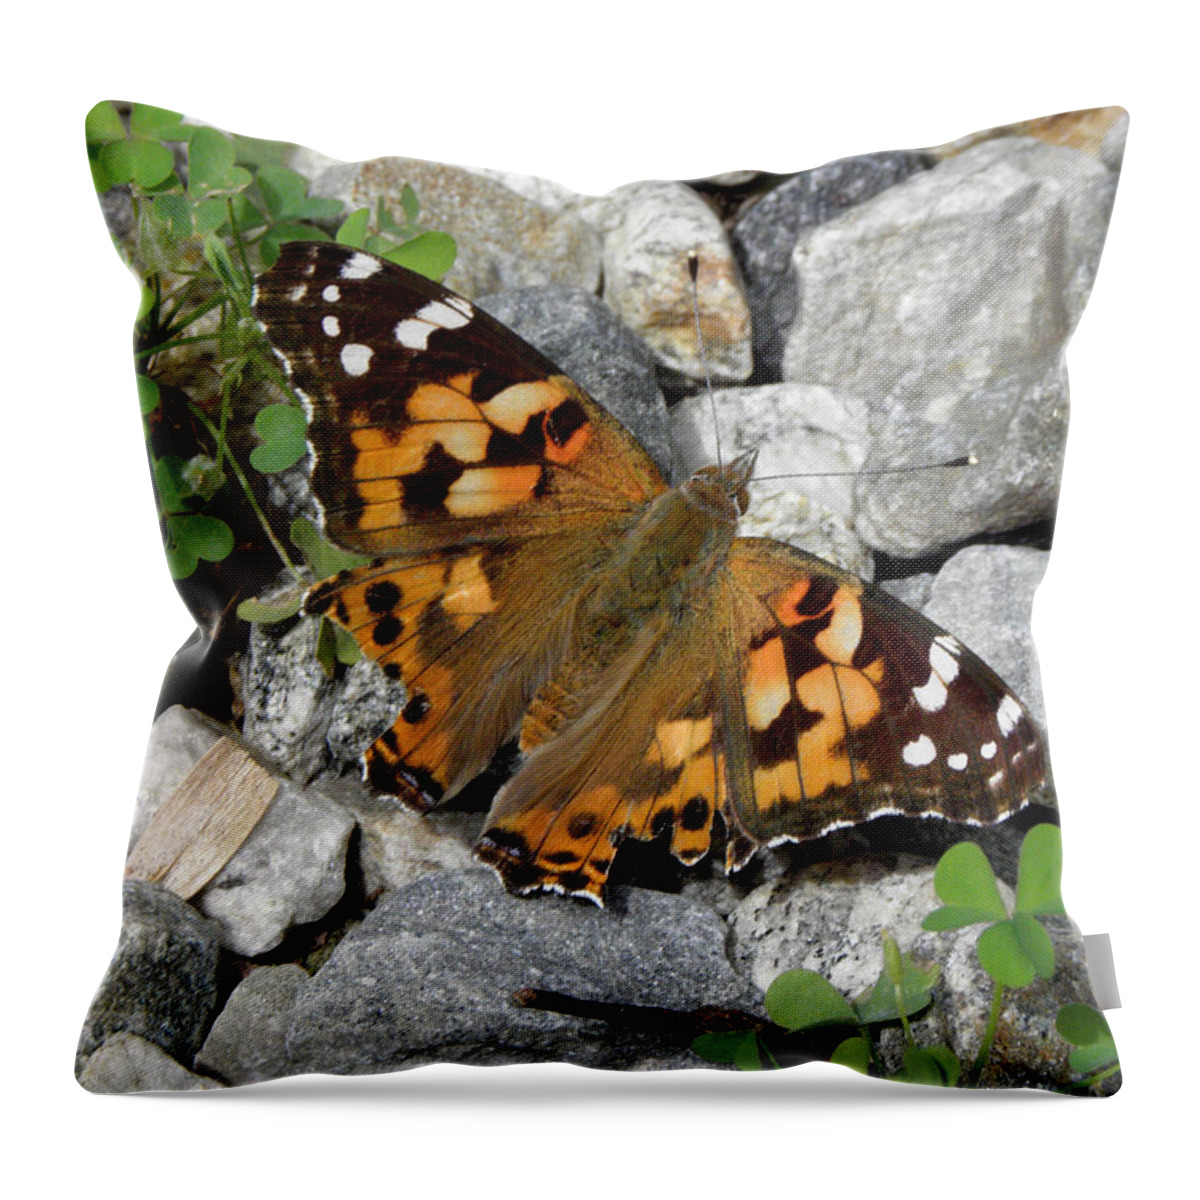 Butterfly Throw Pillow featuring the photograph Resting On Rocky Clovers by Kim Galluzzo Wozniak